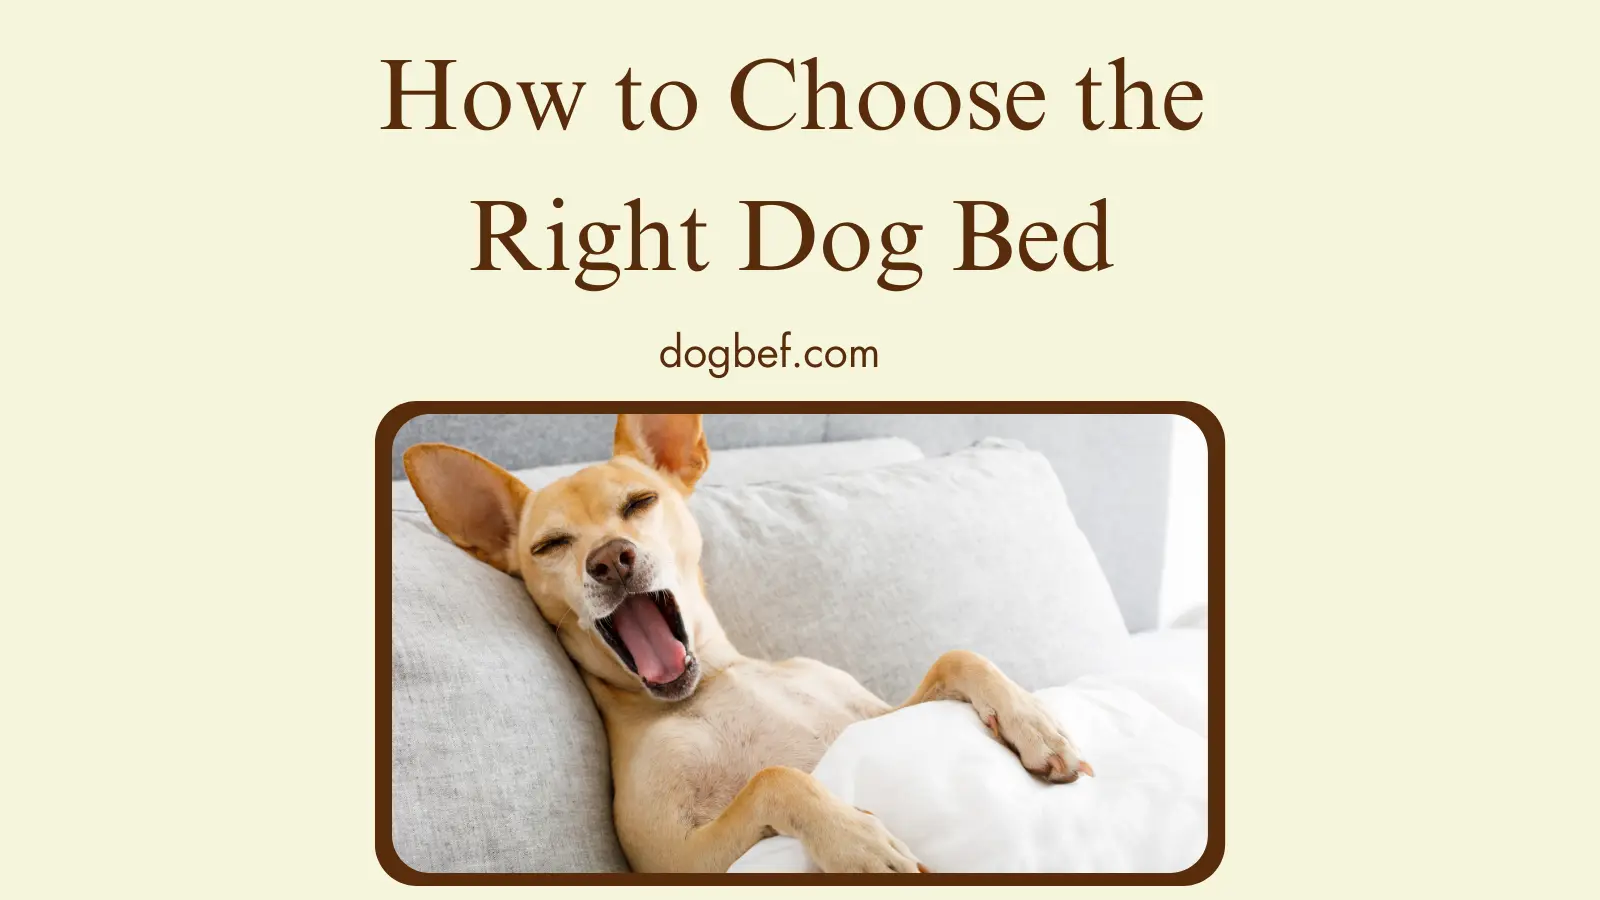 How to choose the right dog bed